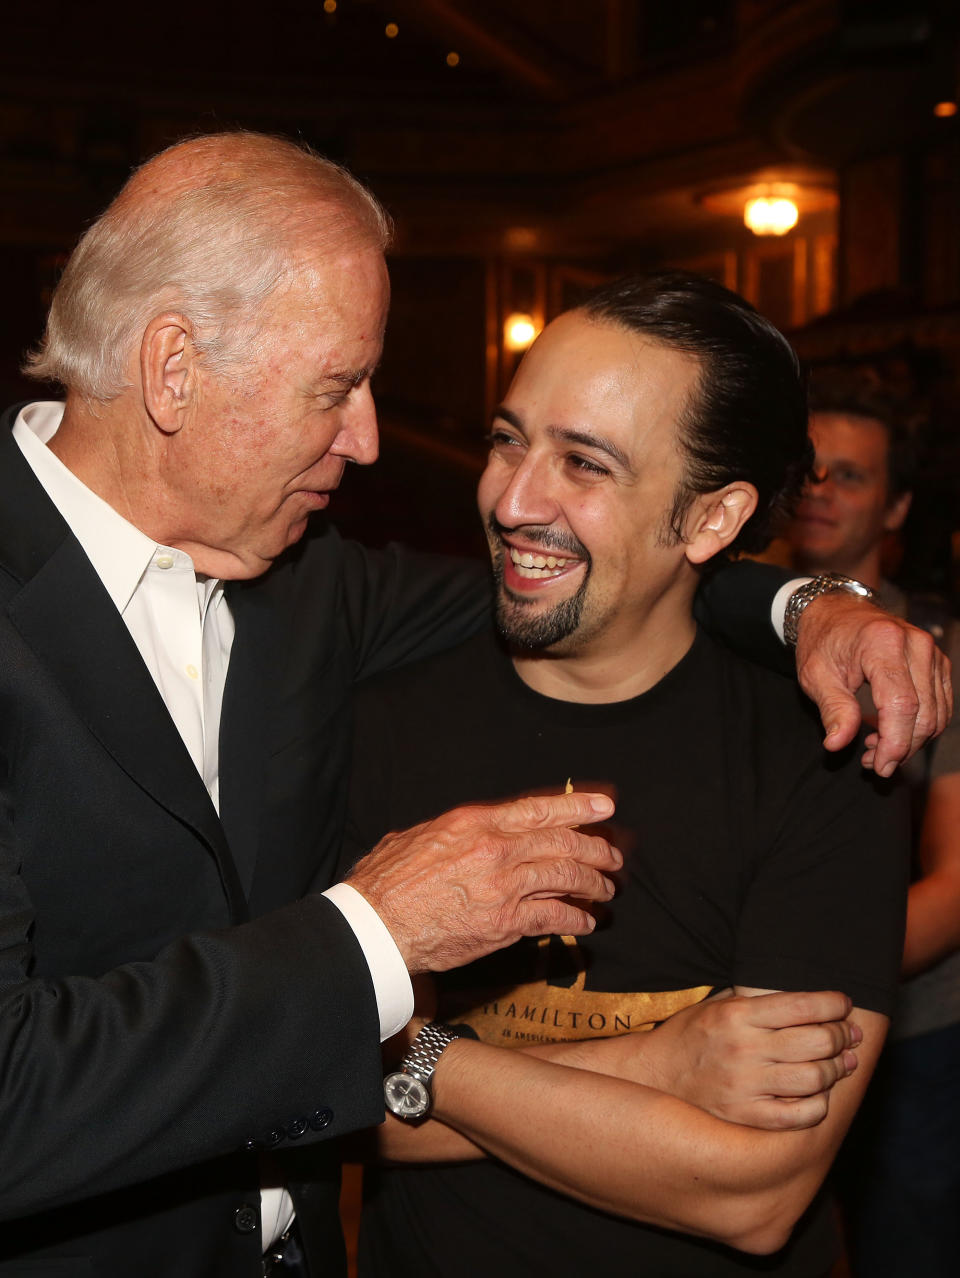 NEW YORK, NY - JULY 27:  Vice President of the United States Joe Biden and Composer/Star of 'Hamilton' Lin-Manuel Miranda pose backstage at the hit new musical 'Hamilton' on Broadway at The Richard Rogers Theater on July 27, 2015 in New York City.  (Photo by Bruce Glikas/FilmMagic)